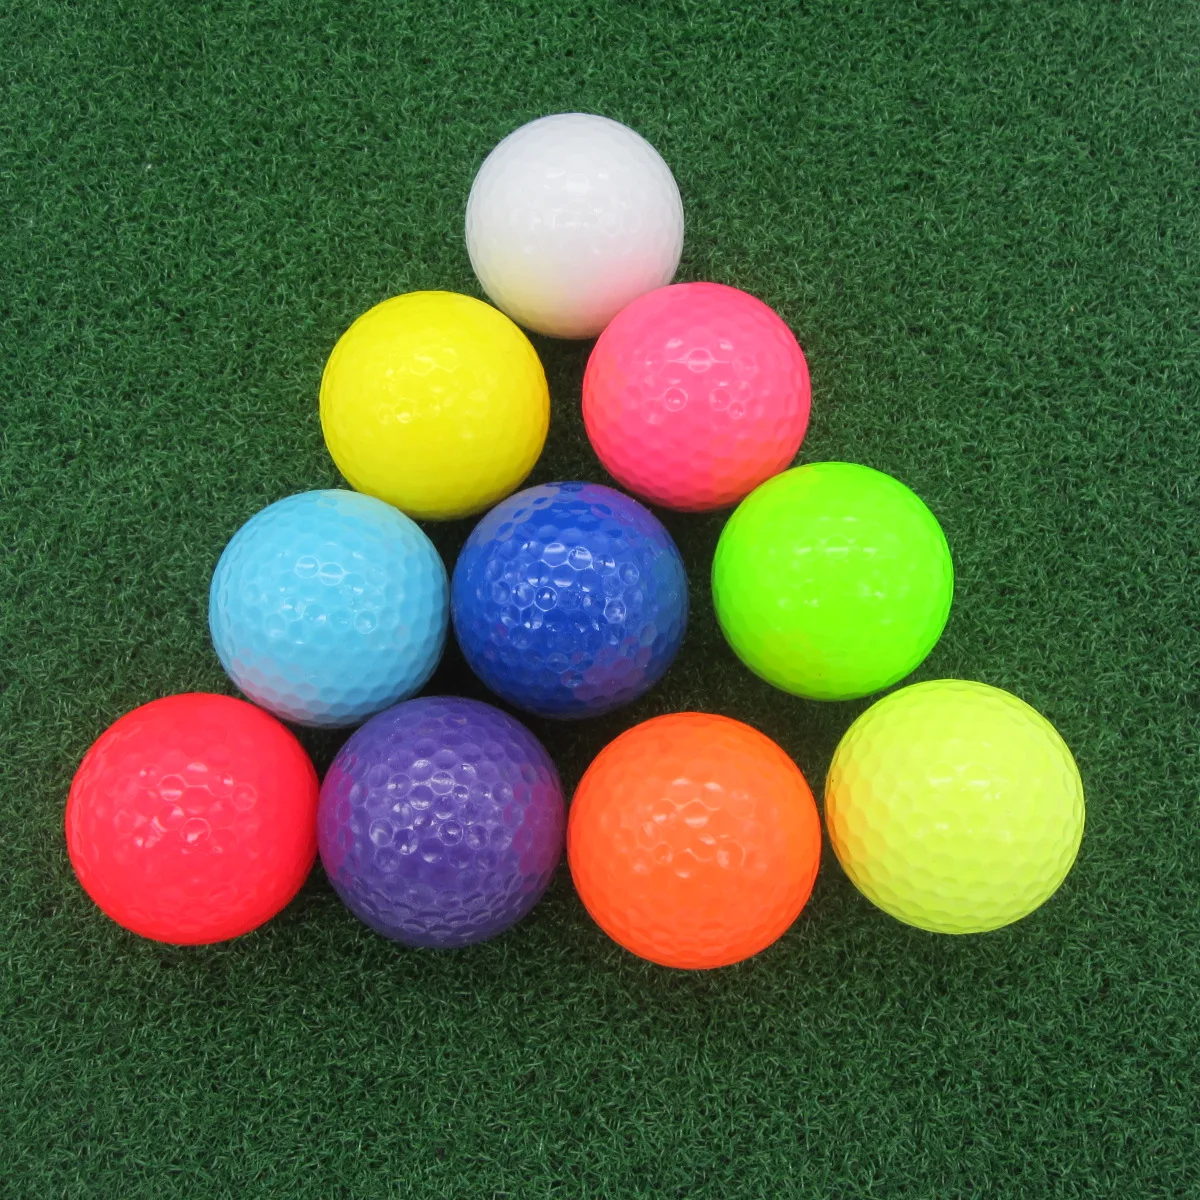 Factory Wholesales 2 Piece Bright Colored Golf Balls In Stock - Buy